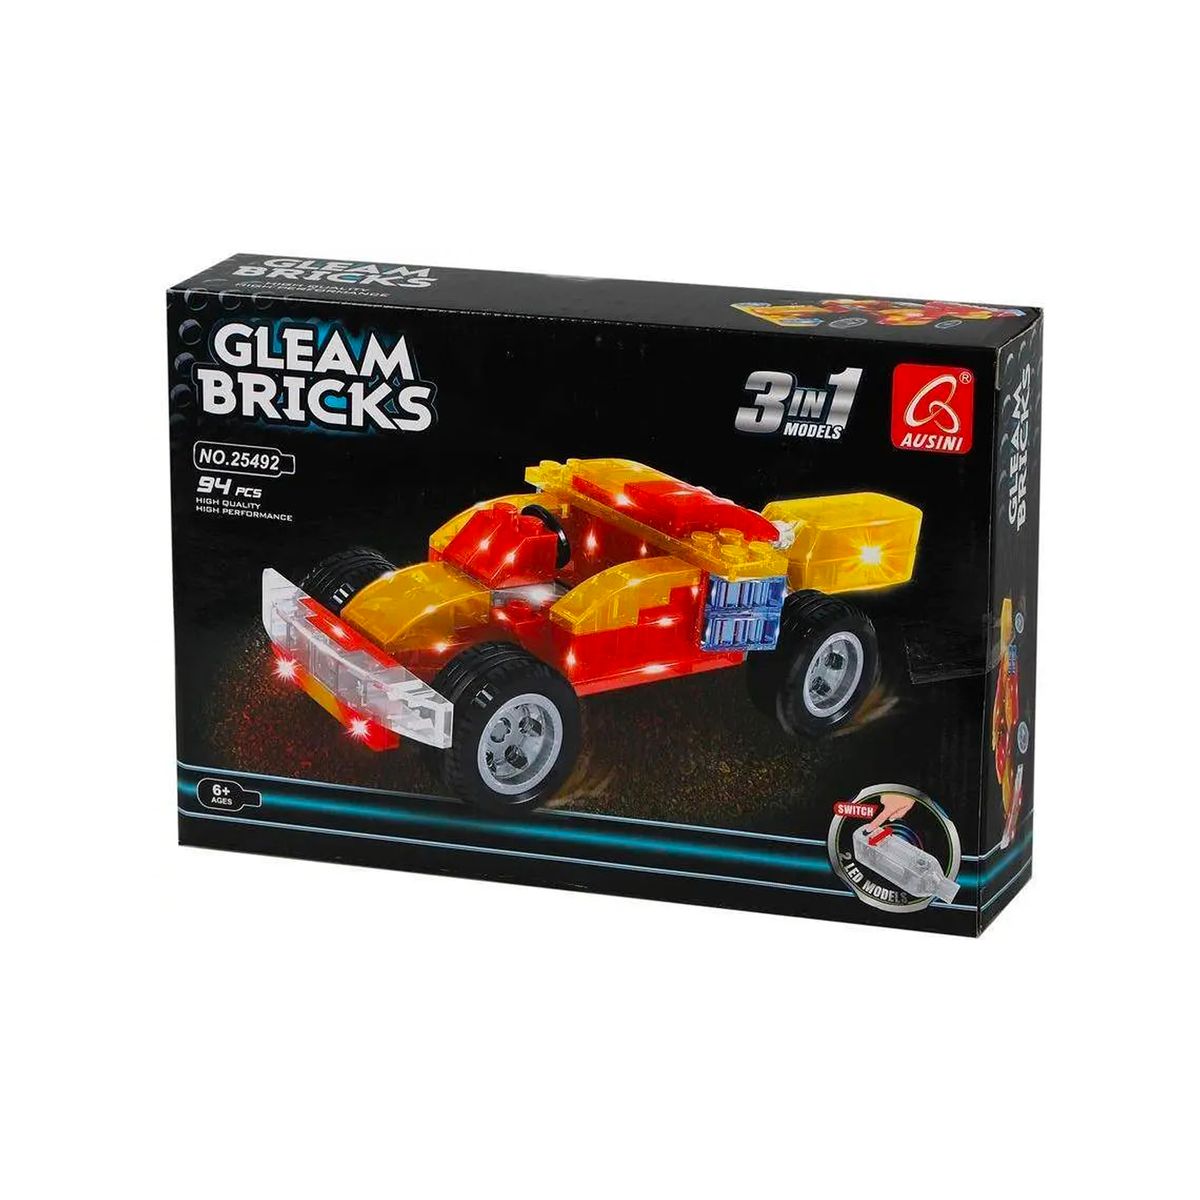 Photos - Construction Toy Private Label Gleam Brick 3-in-1 Model Toy - 94 Pieces - Car FS1180-M2